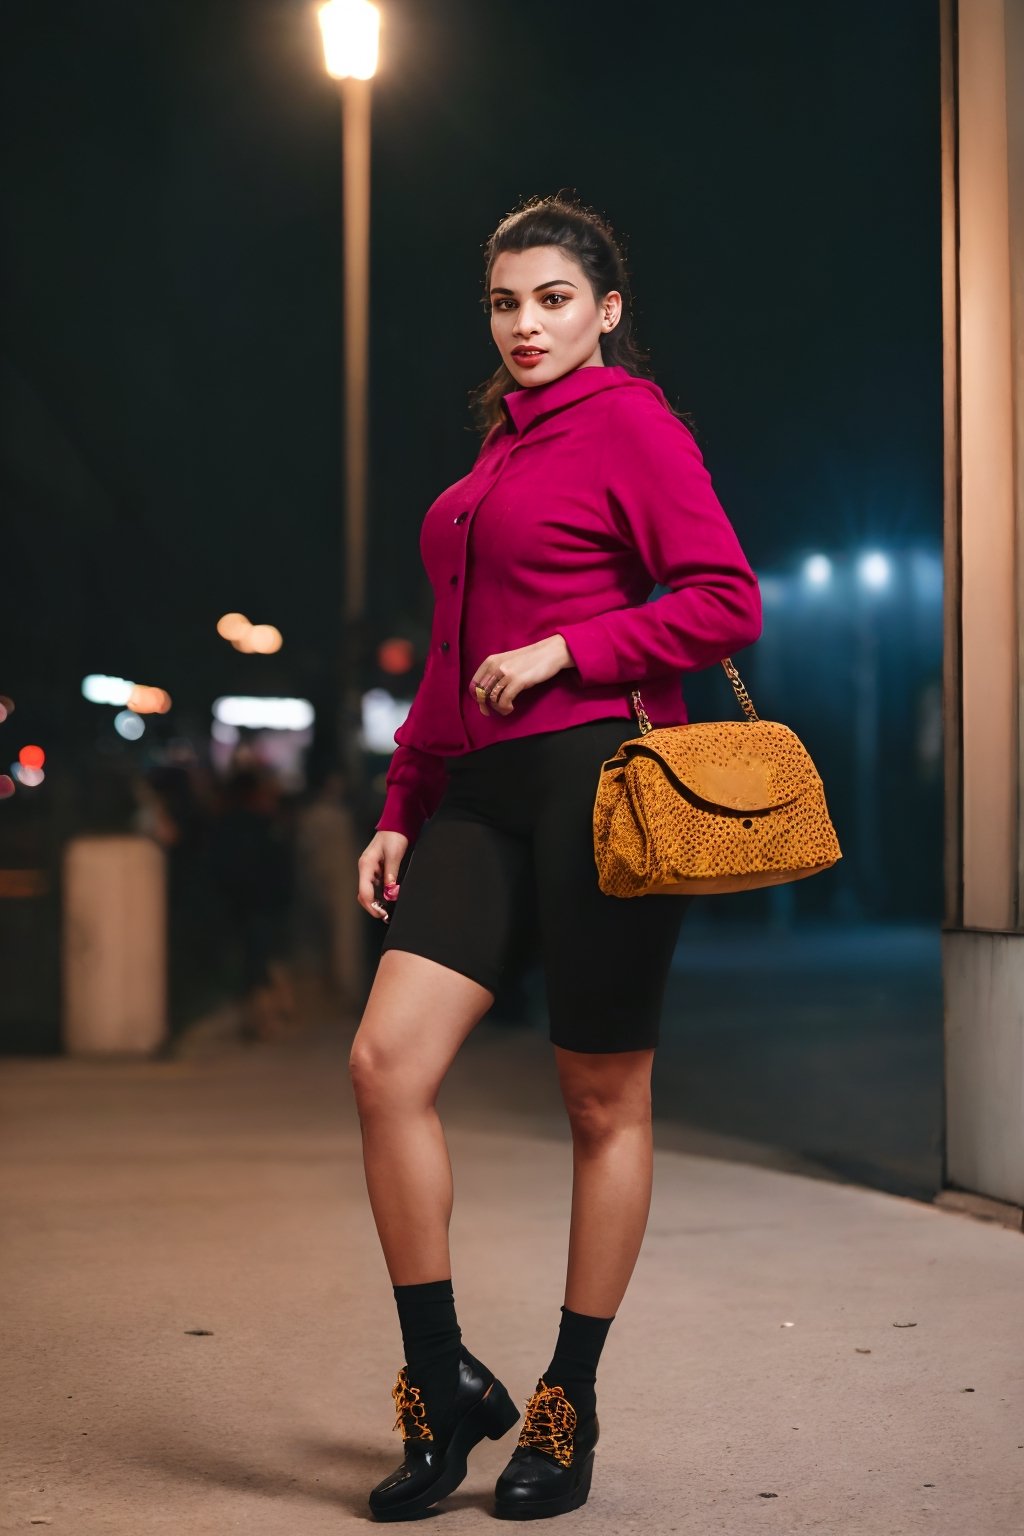 (best quality, photo-realistic:1.37), street fashion, vibrant colors, urban setting, dynamic lighting, stylish outfit, confident expression, fashionable accessories, bustling cityscape, busy pedestrians, modern architecture,29yo girl